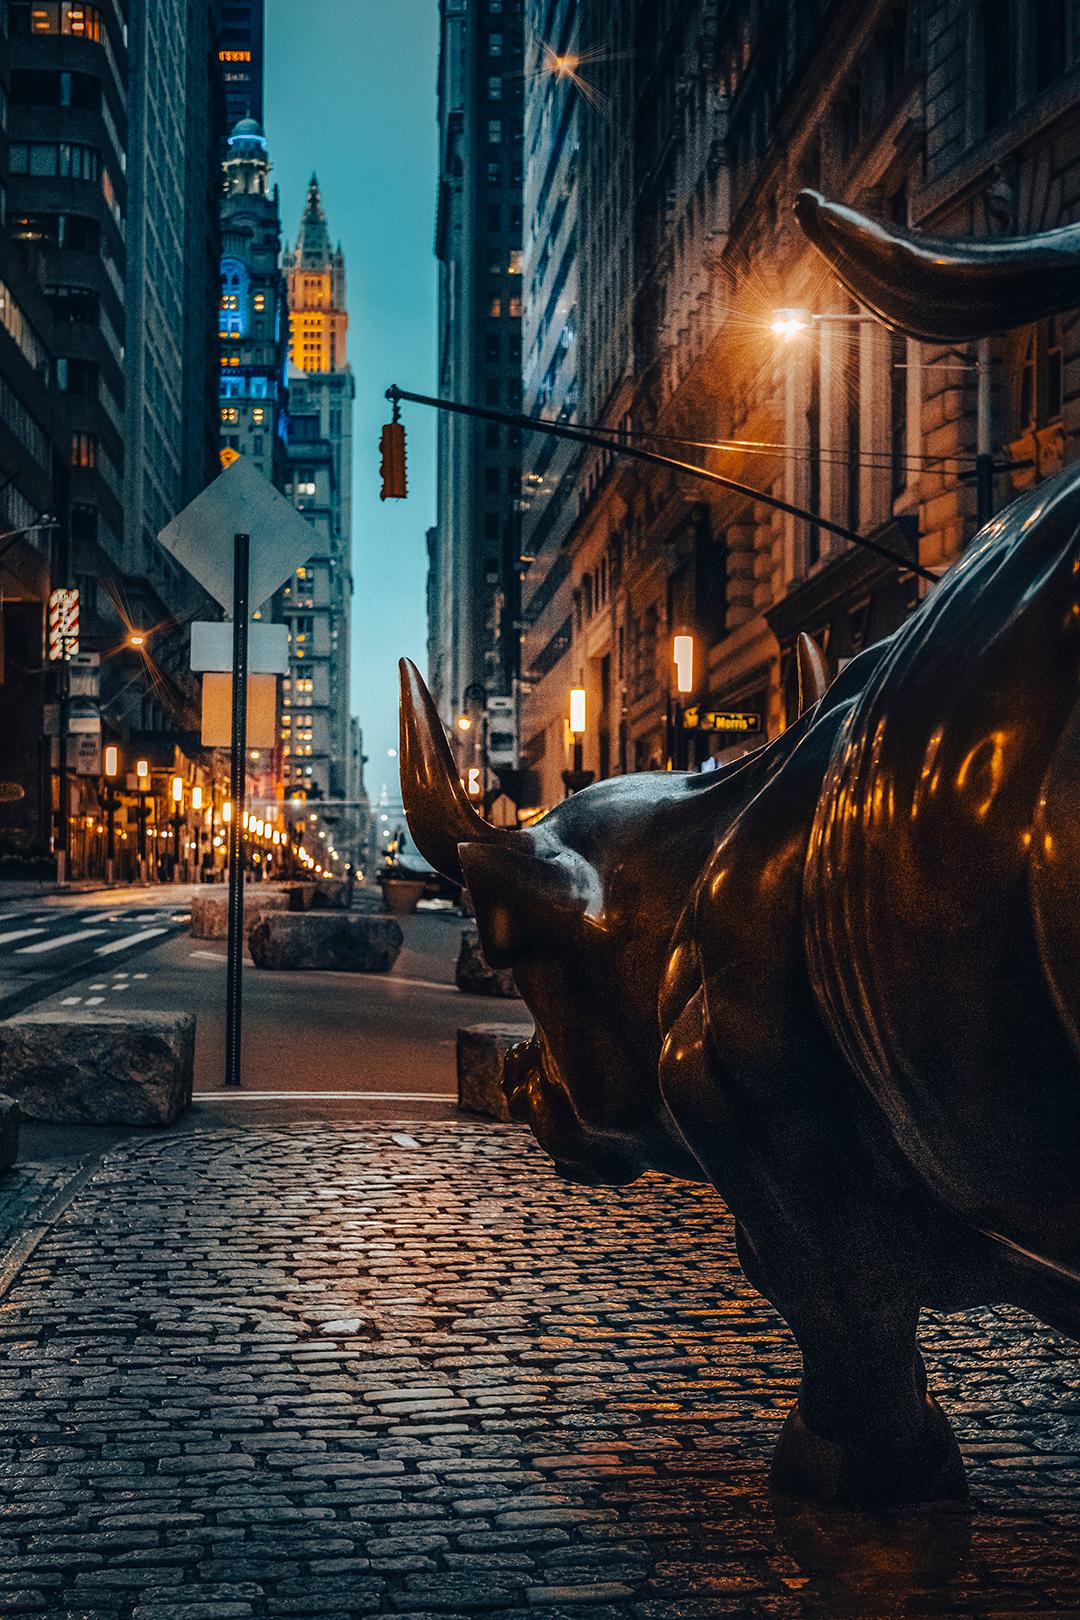 Viet Chu Landscape Photograph - Wall Street Bull - NYC Photography, 54"x36", Signed Limited Edition of 5